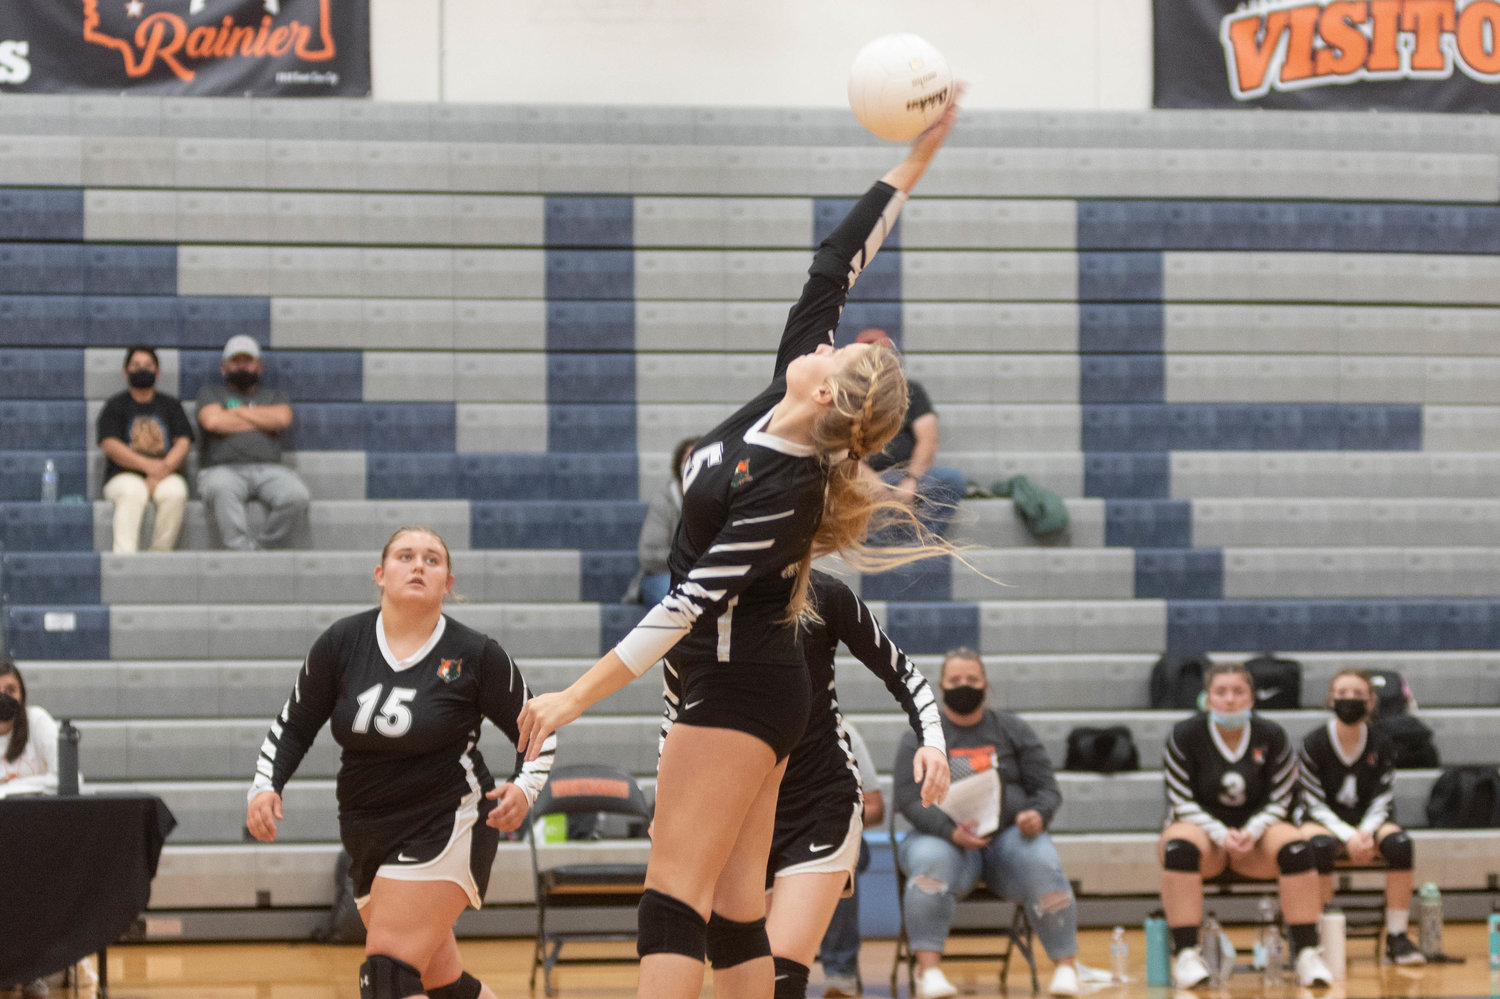 Morton-White Pass junior Breejah Townsend hits a spike in the Timberwolves win over Rainier Tuesday night.